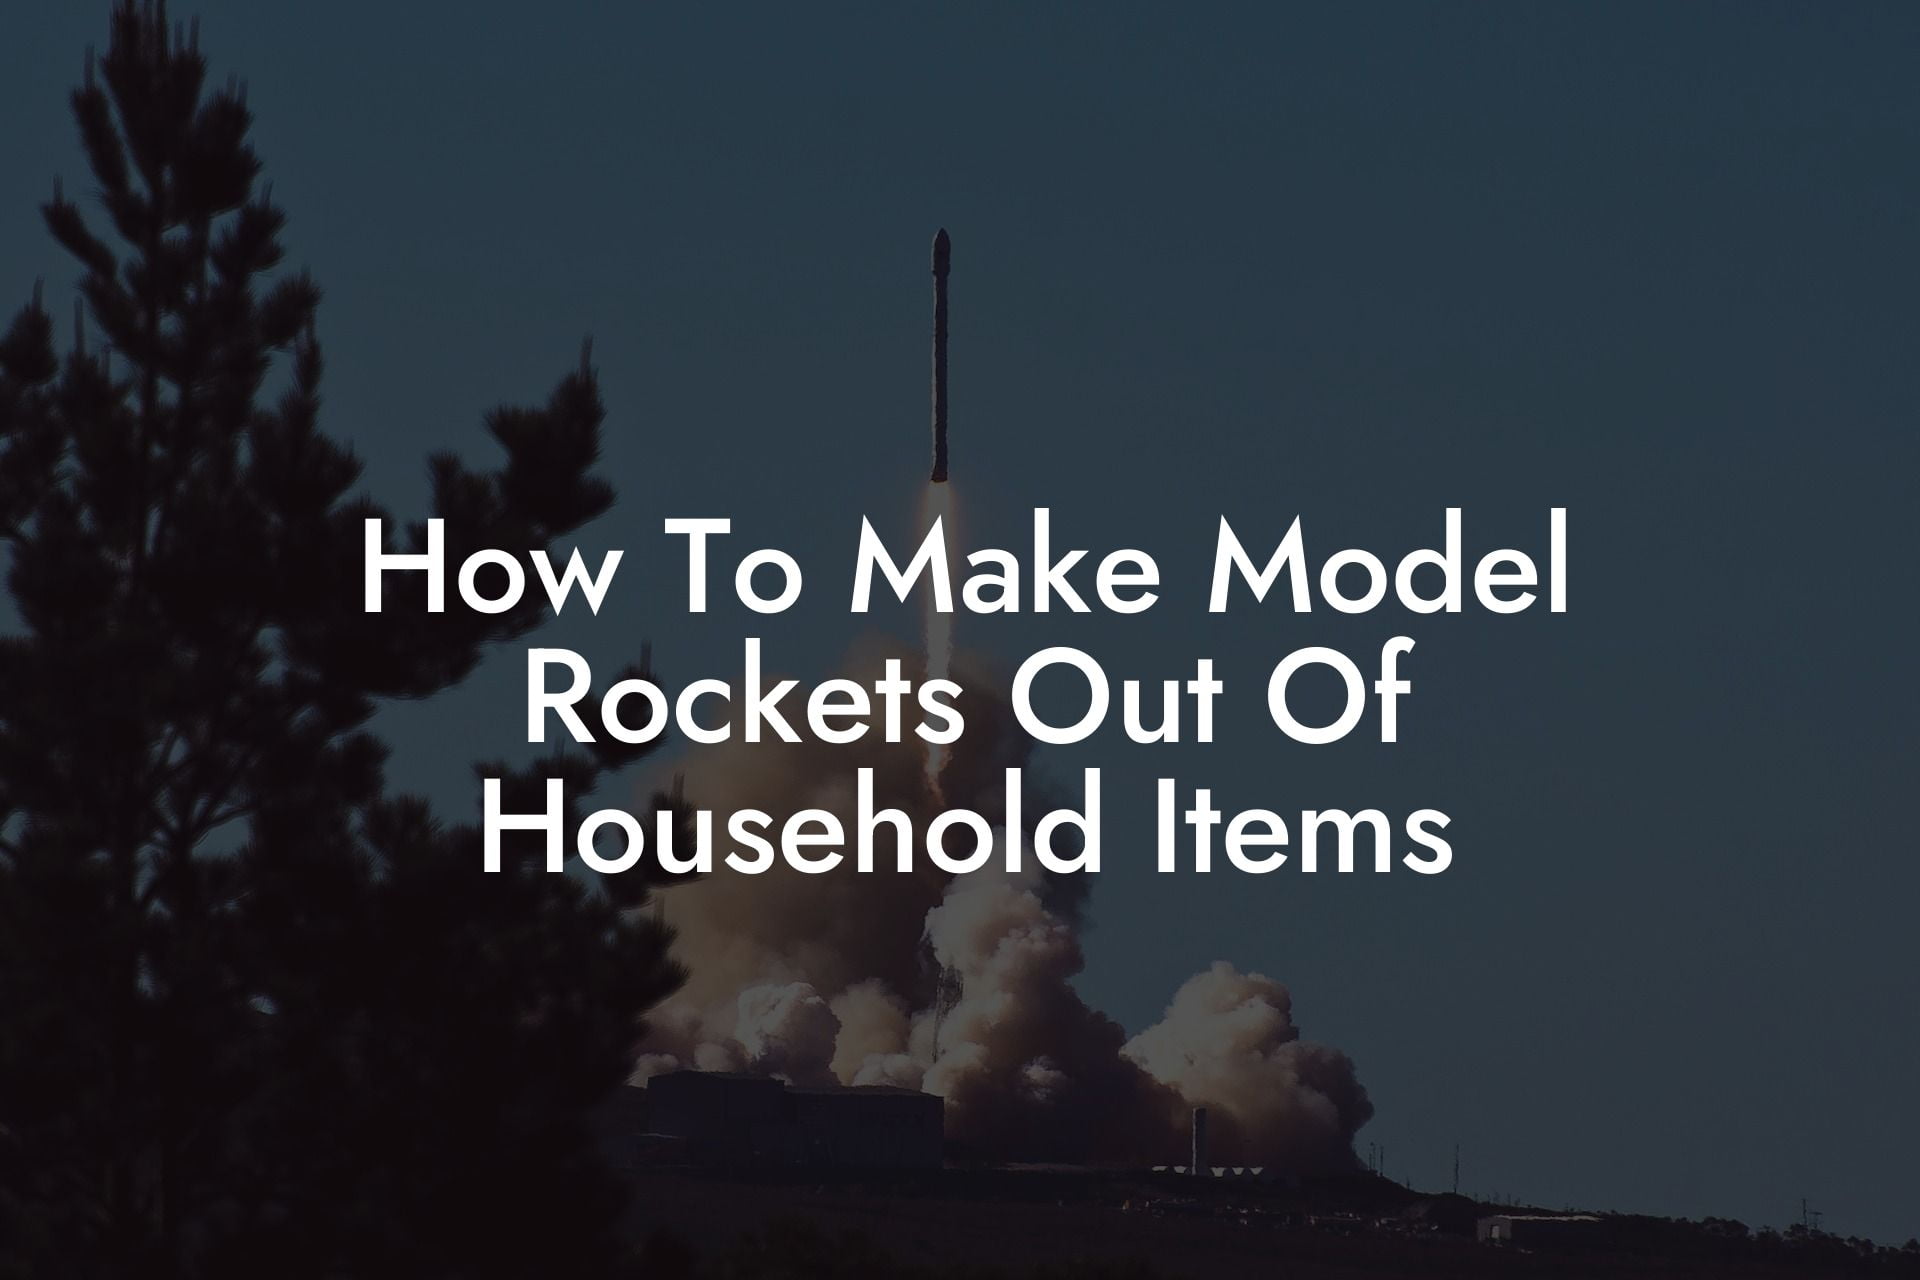 How To Make Model Rockets Out Of Household Items